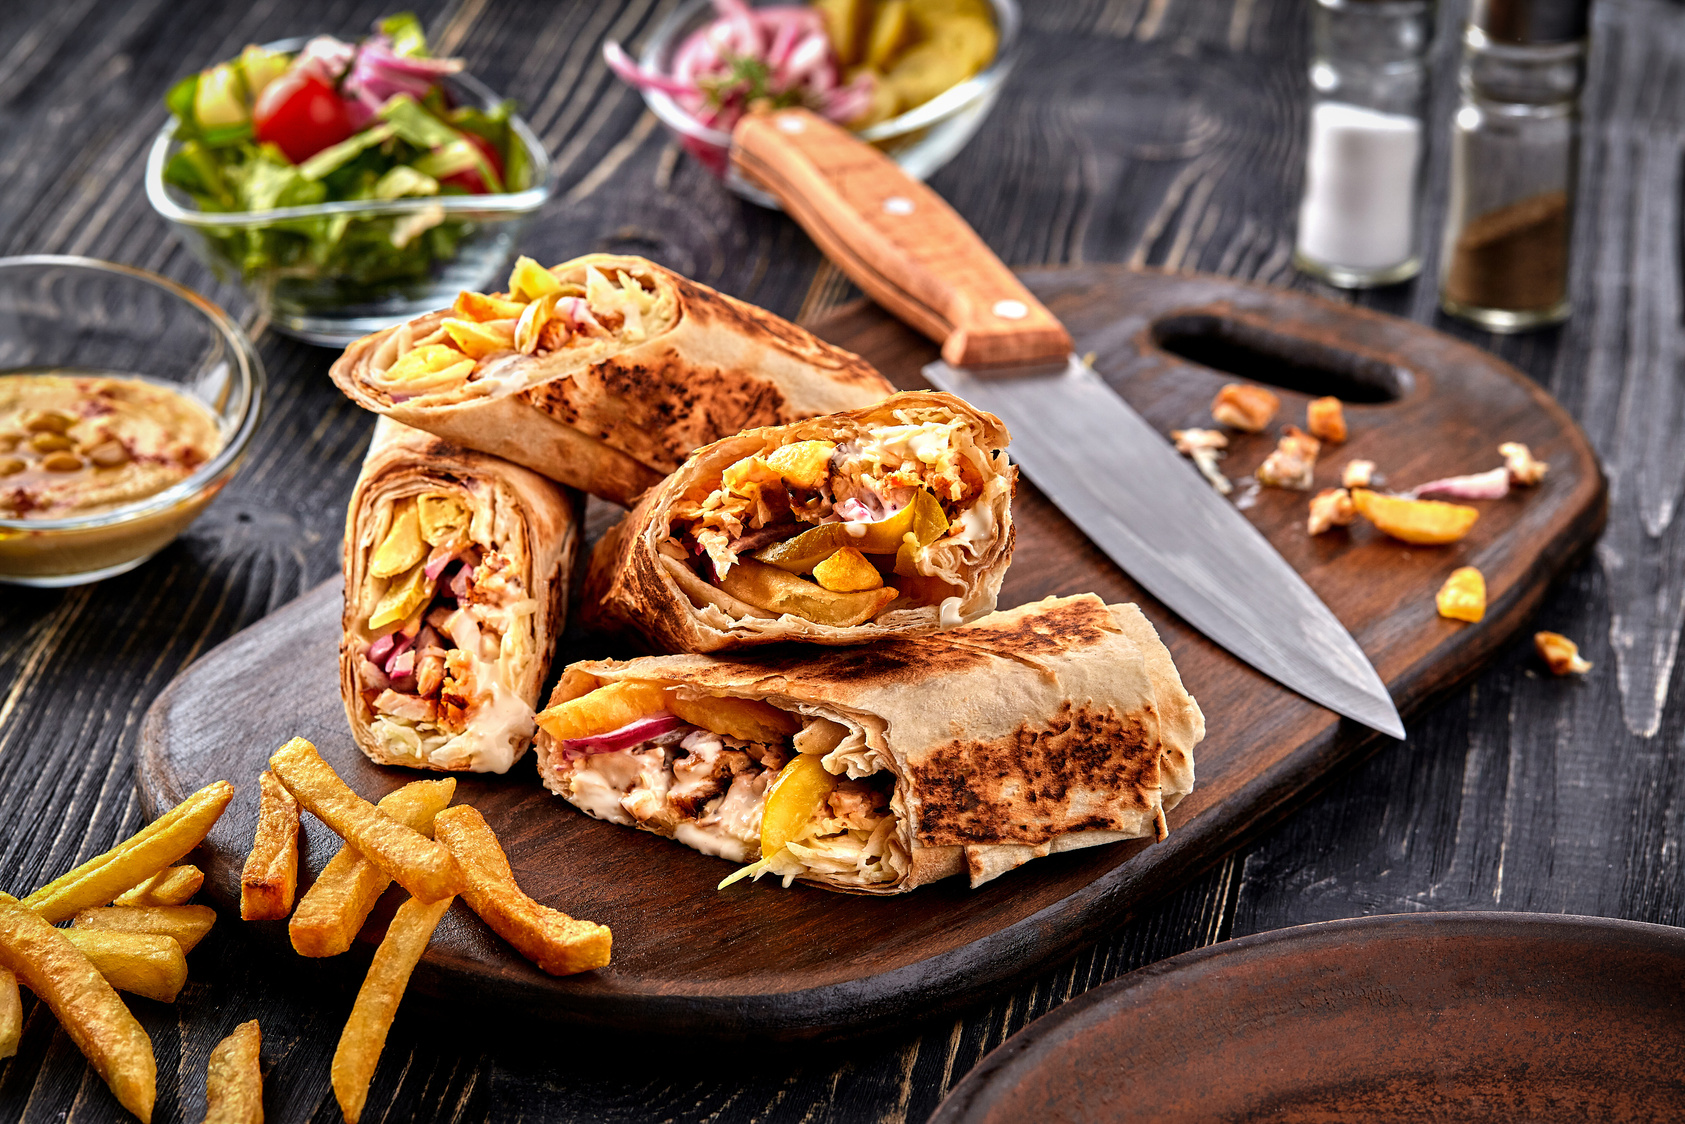 Shawarma Chicken Roll in a Pita with Fresh Vegetables, Cream Sauce and French Fries on Wooden Background. Selective Focus